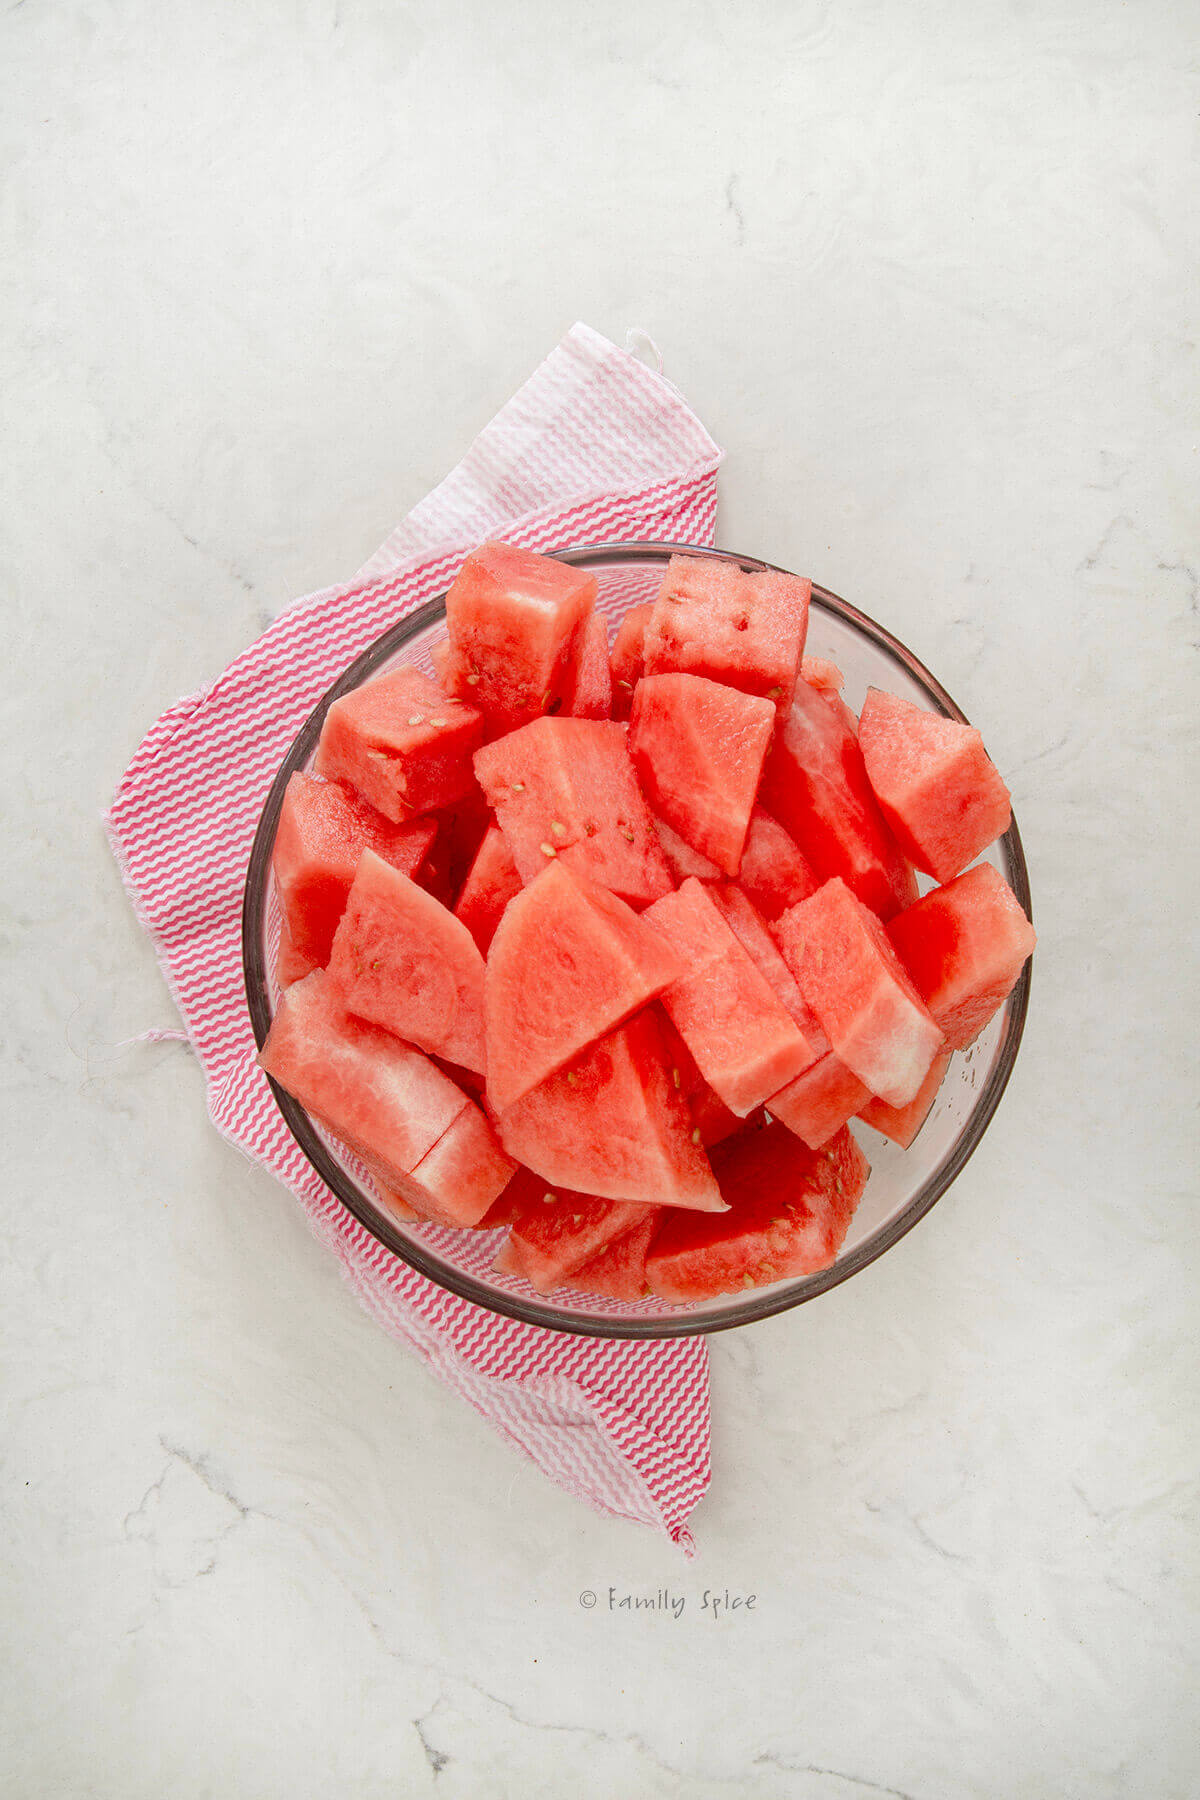 A bowl filled with cut up pieces of watermelon